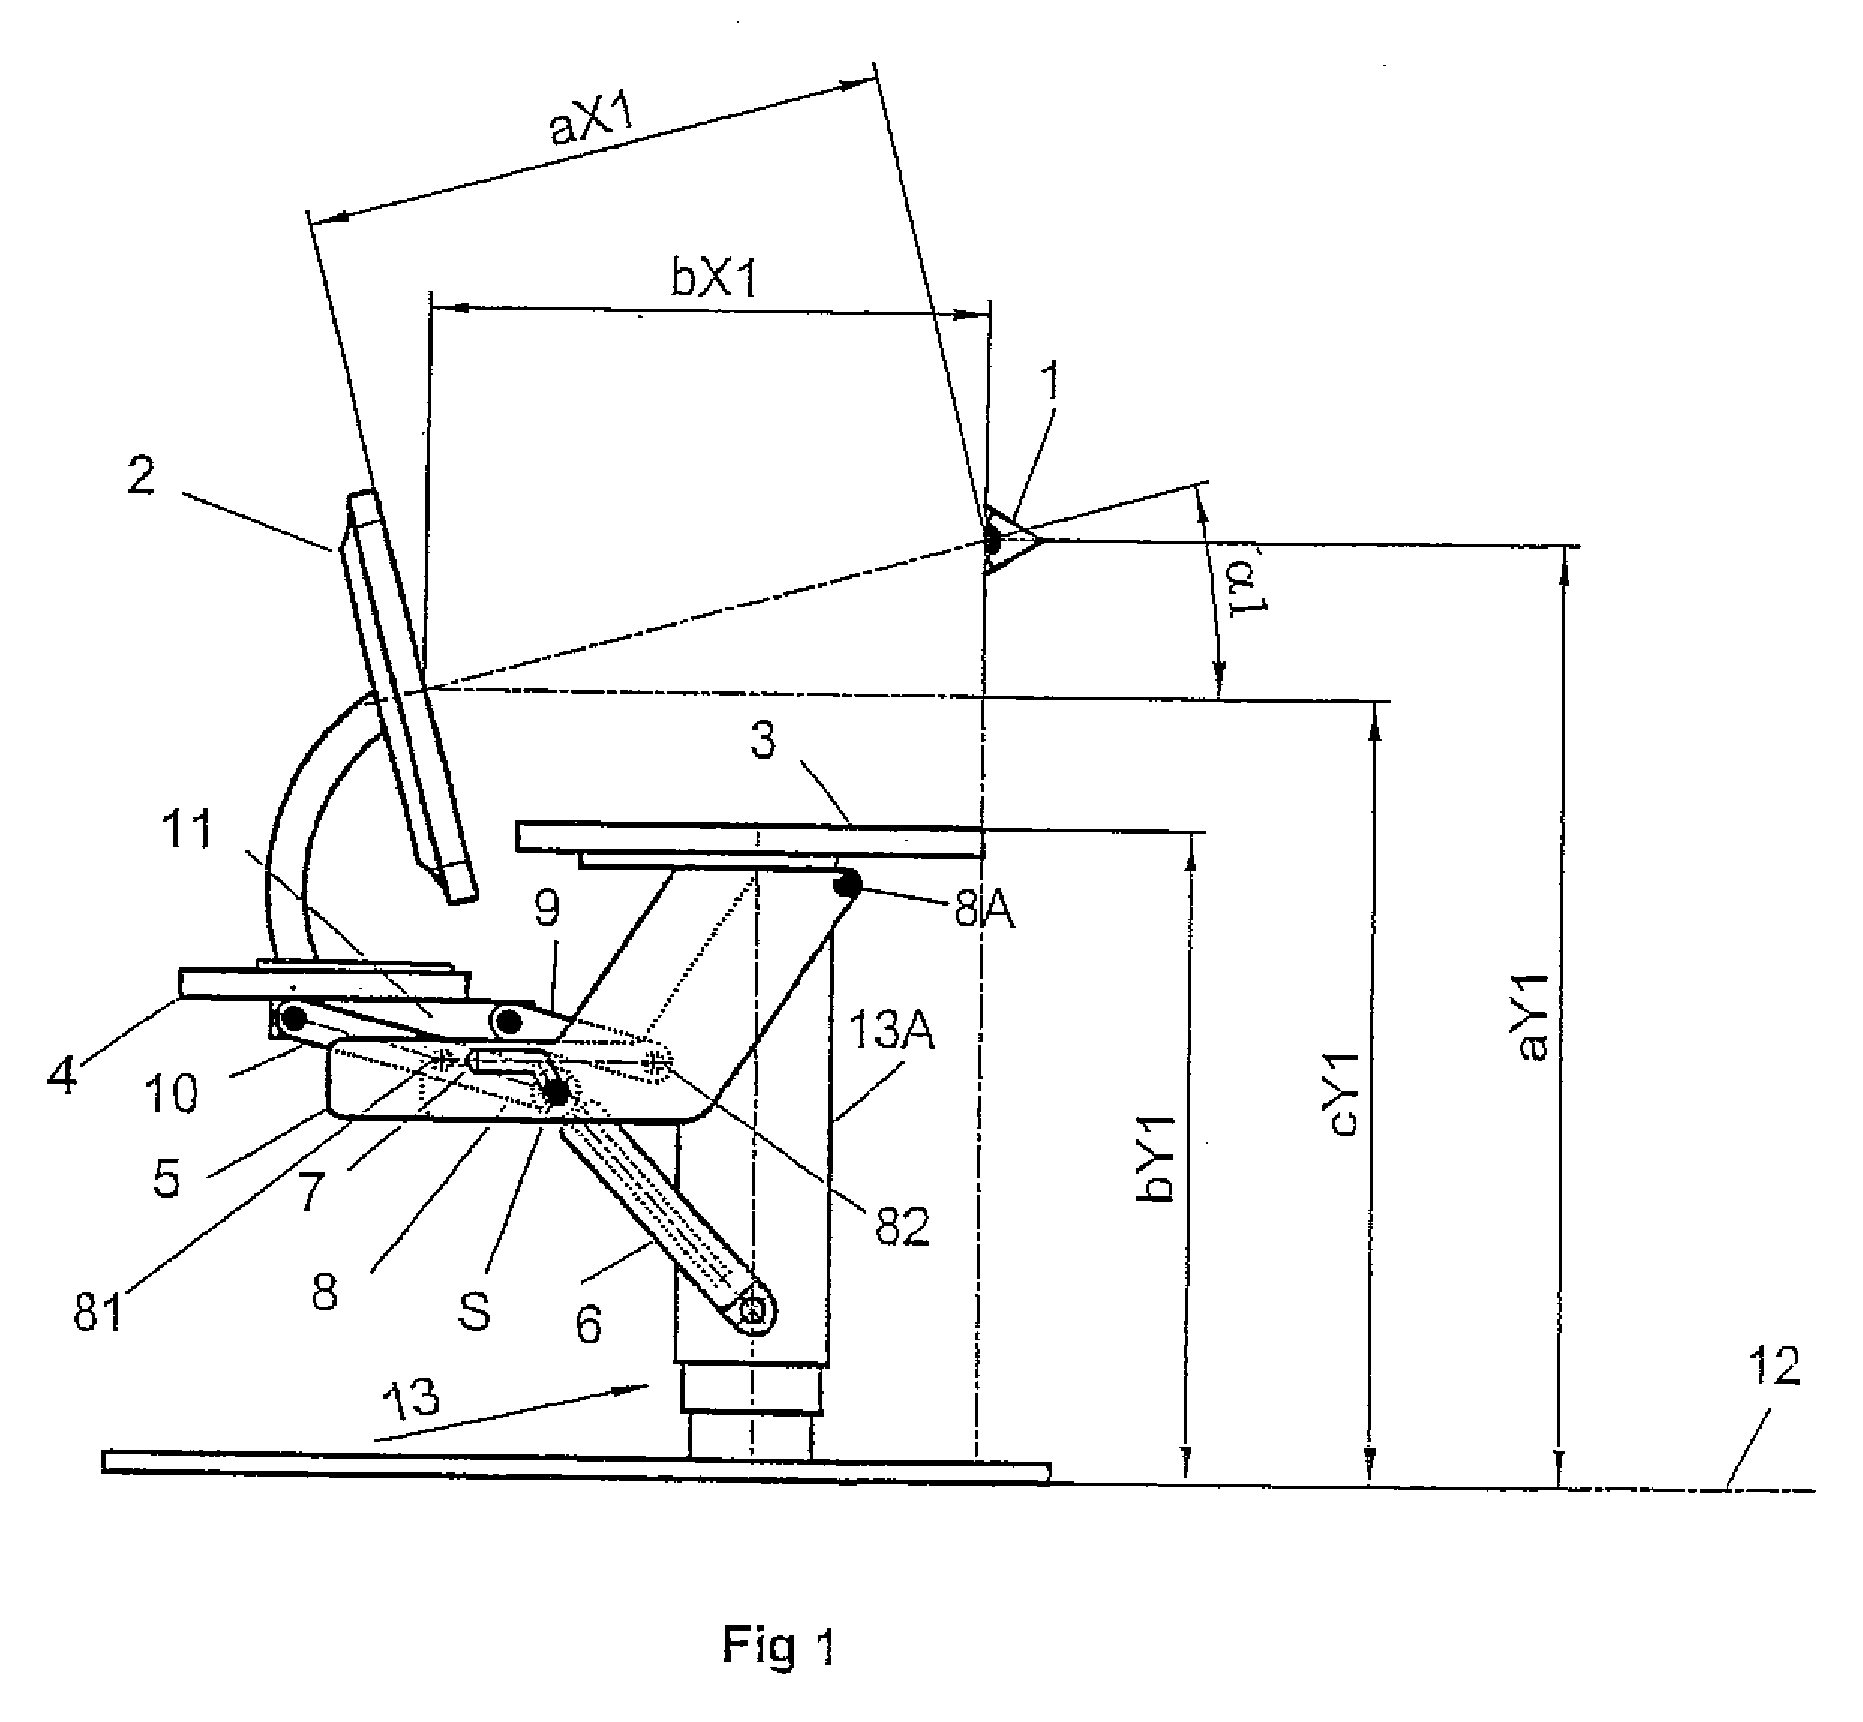 Supporting arrangement for a presentation device